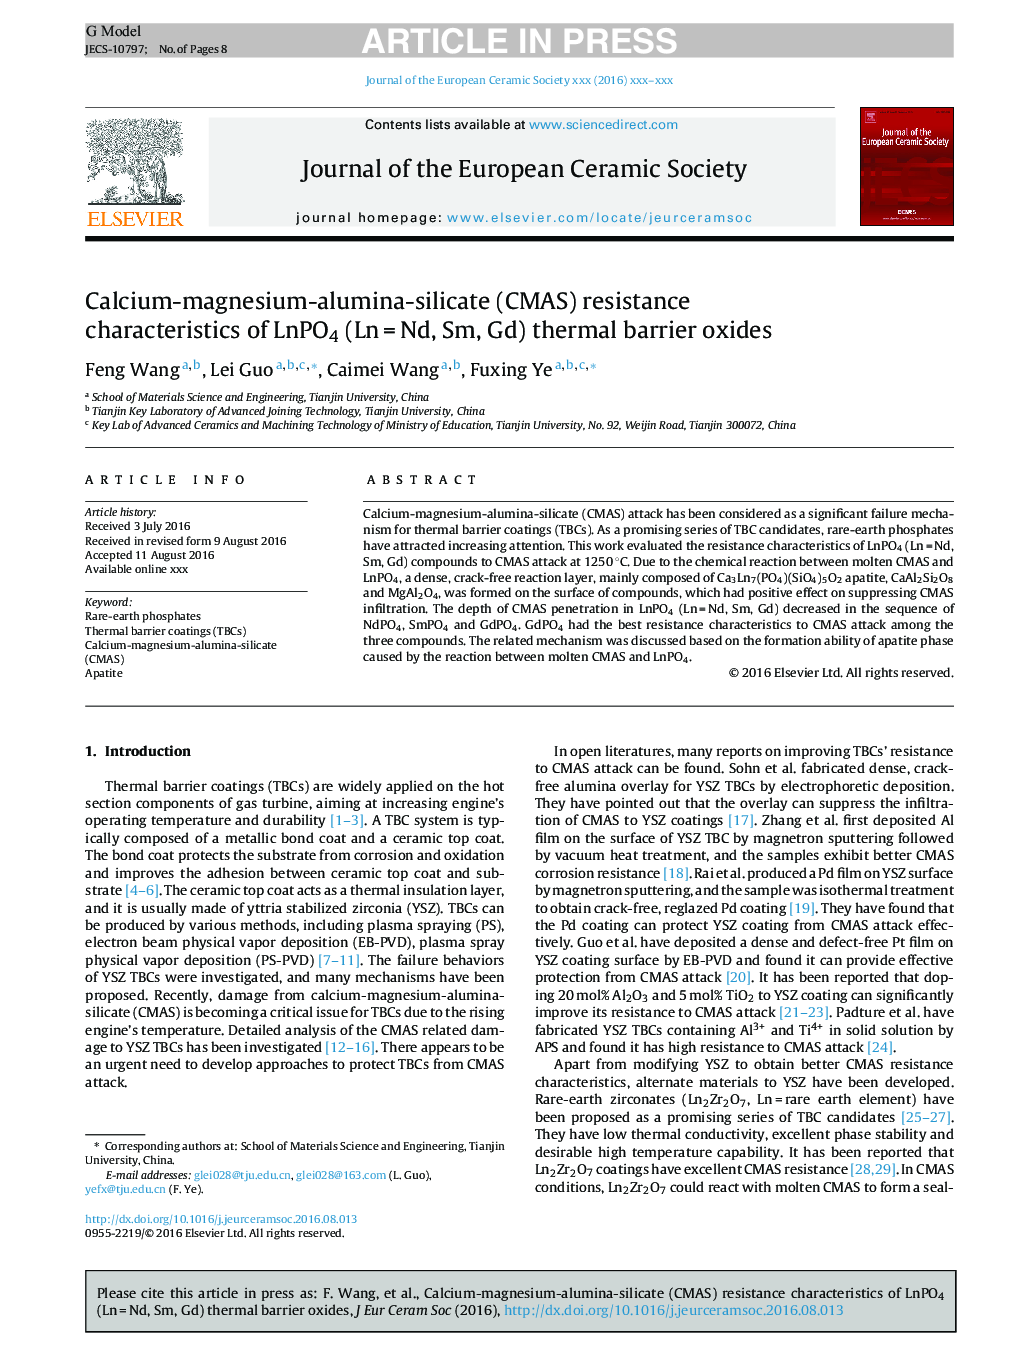 Calcium-magnesium-alumina-silicate (CMAS) resistance characteristics of LnPO4 (LnÂ =Â Nd, Sm, Gd) thermal barrier oxides